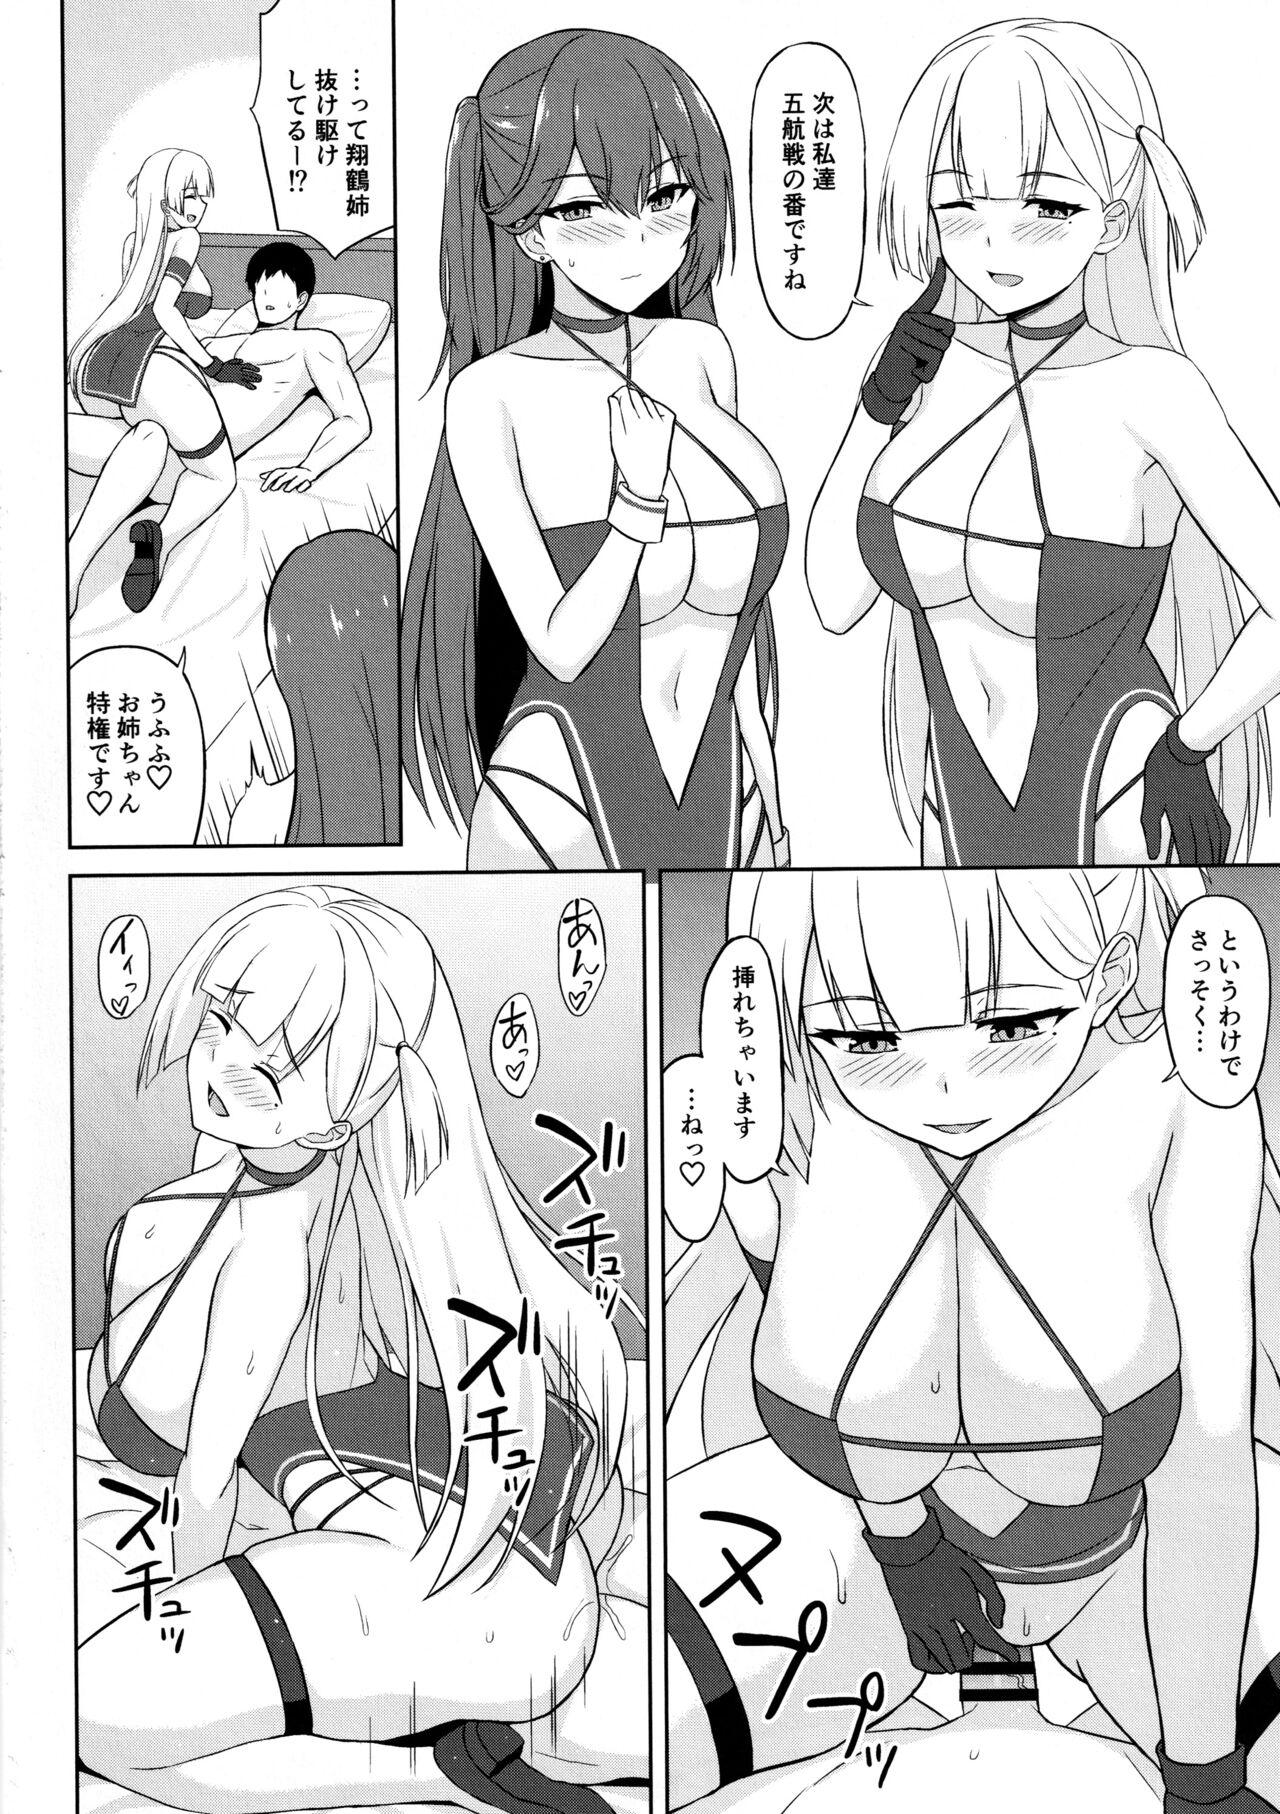 Music Juuou Race Queens 2 - Azur lane Muscle - Page 9